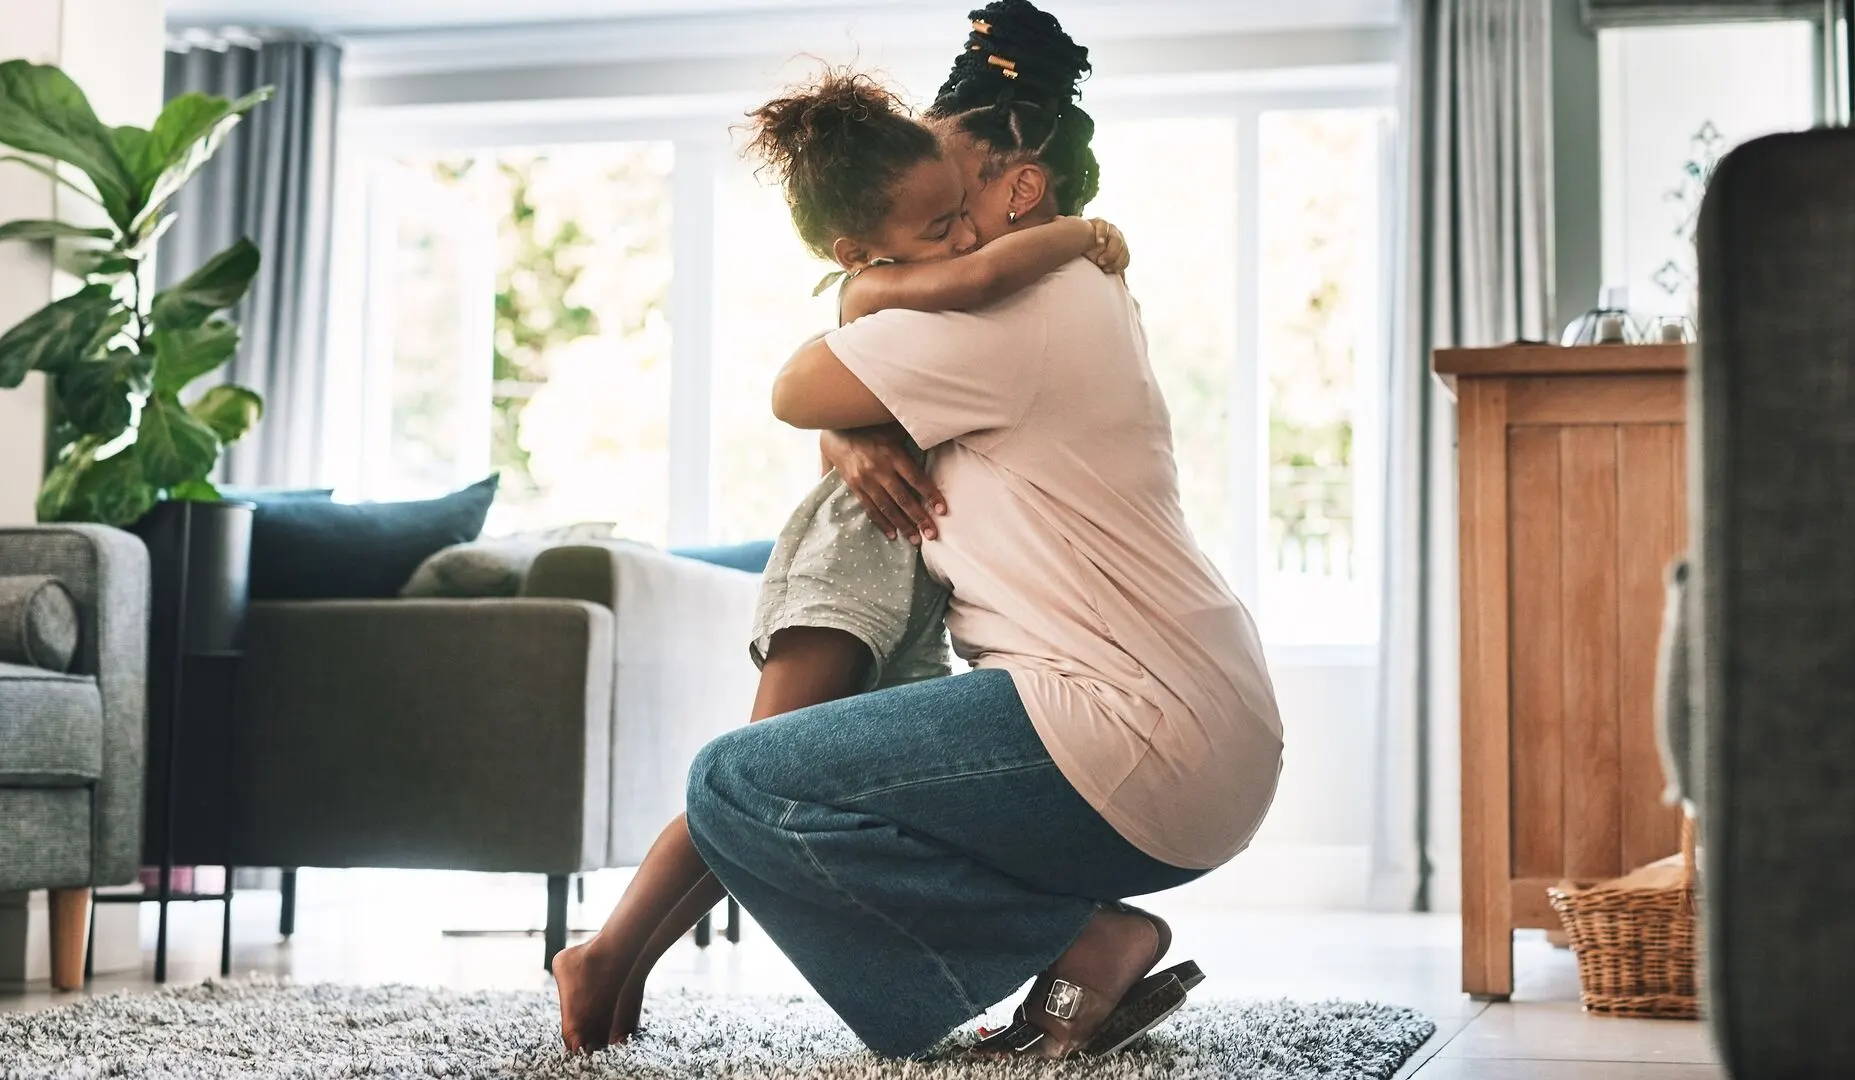 Mom crouching down and hugging her daughter – the kid is longing to go out to play but she has hay fever so has to stay home